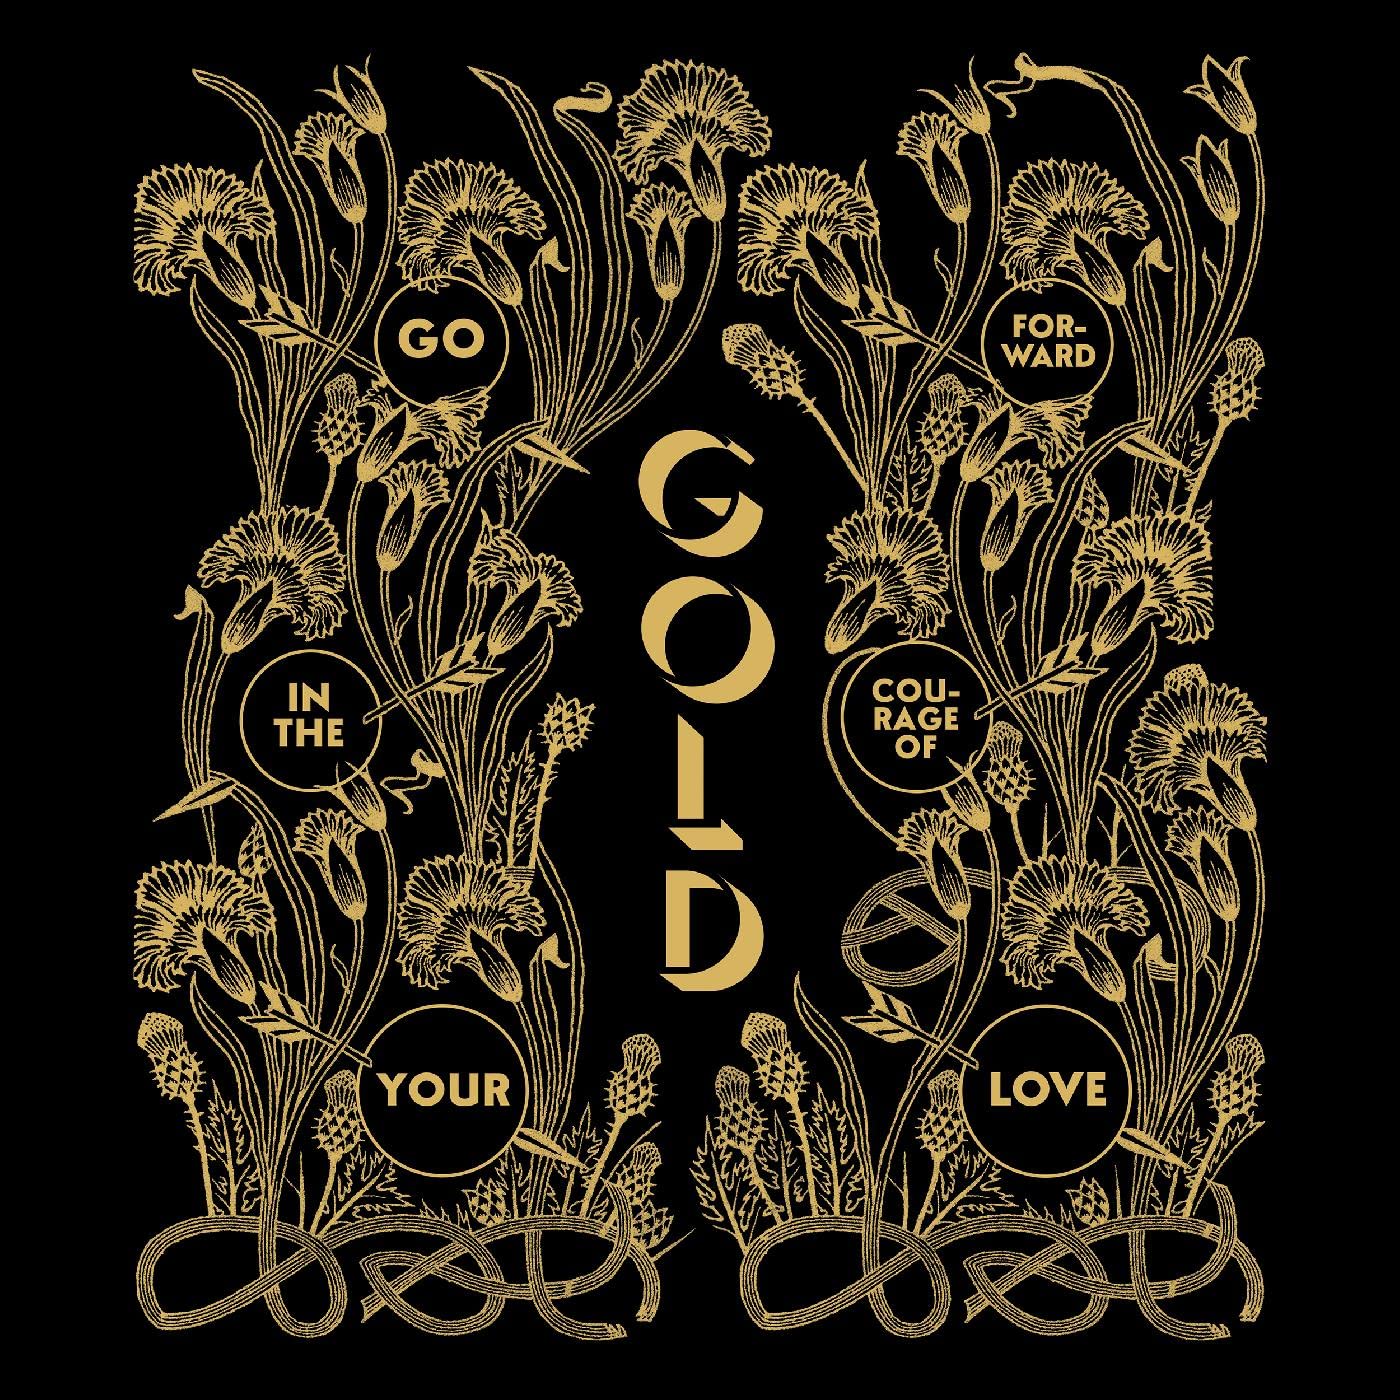 alabaster deplume gold go forward in the courage of your love coloured 2lp 2022 eye of the sun gatefold limited виниловая пластинка Виниловая пластинка DePlume, Alabaster, Gold - Go Forward In The Courage Of Your Love (0789993991617)